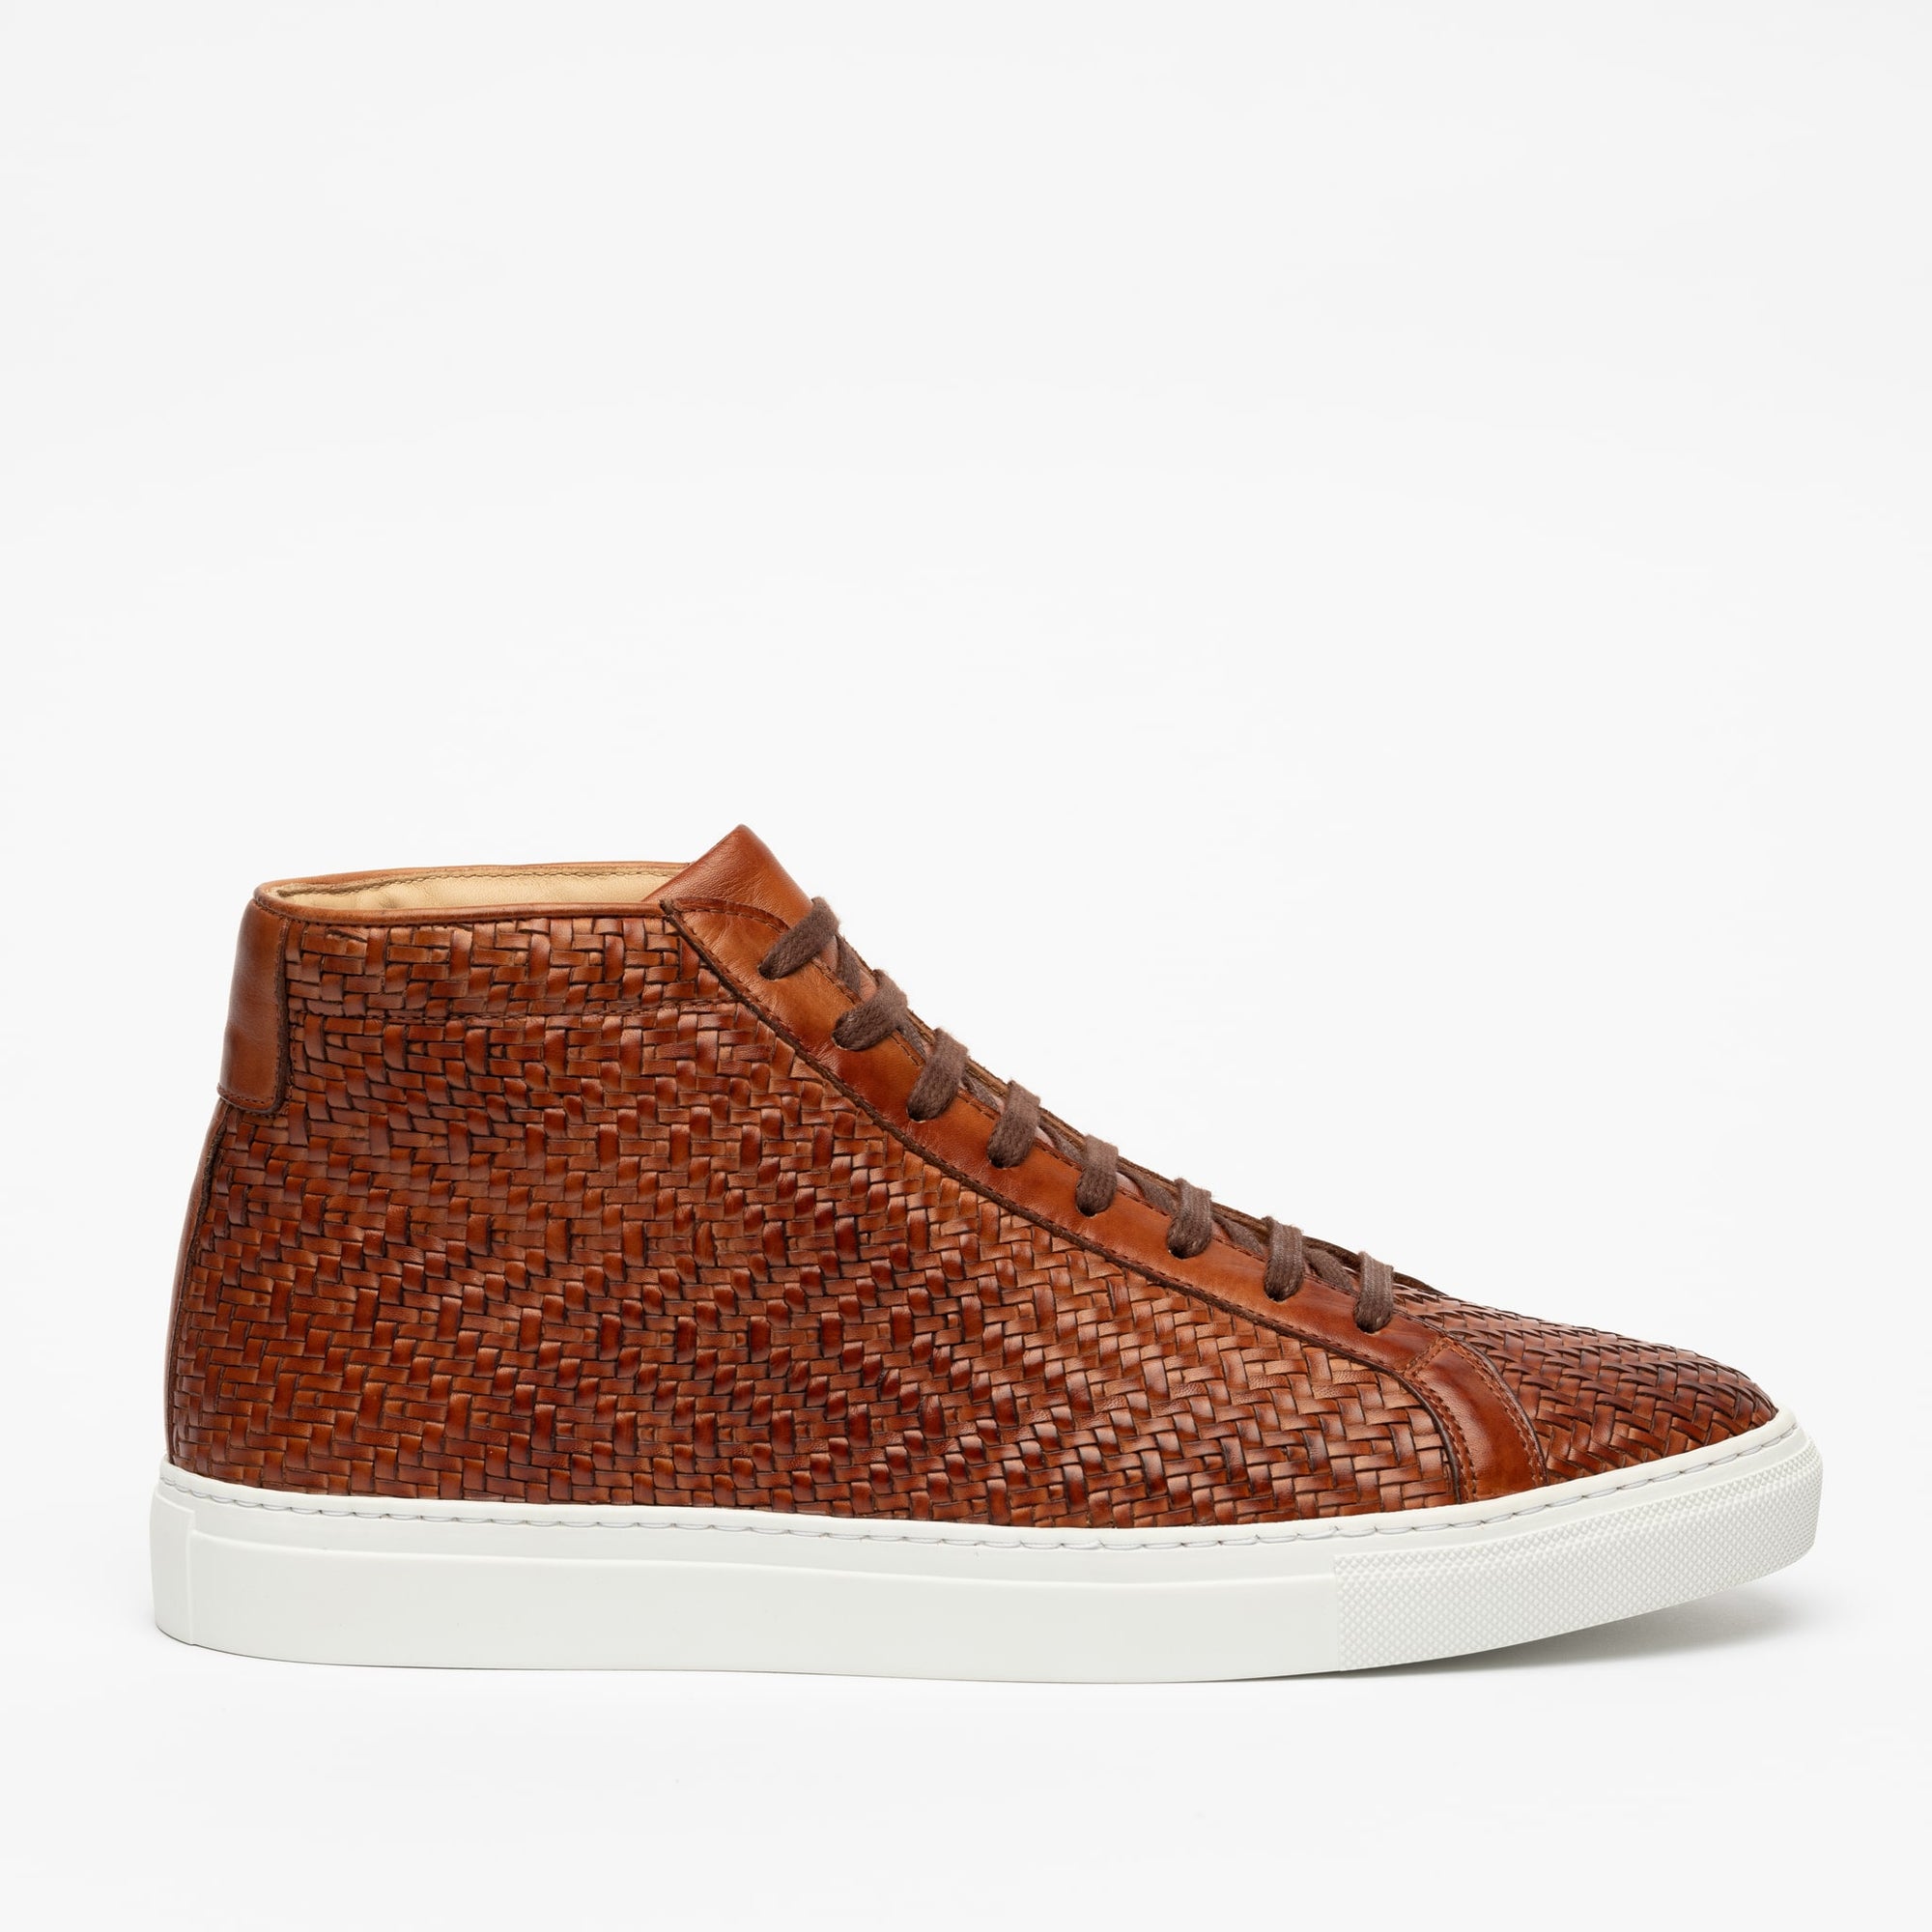 The Hightop in Woven